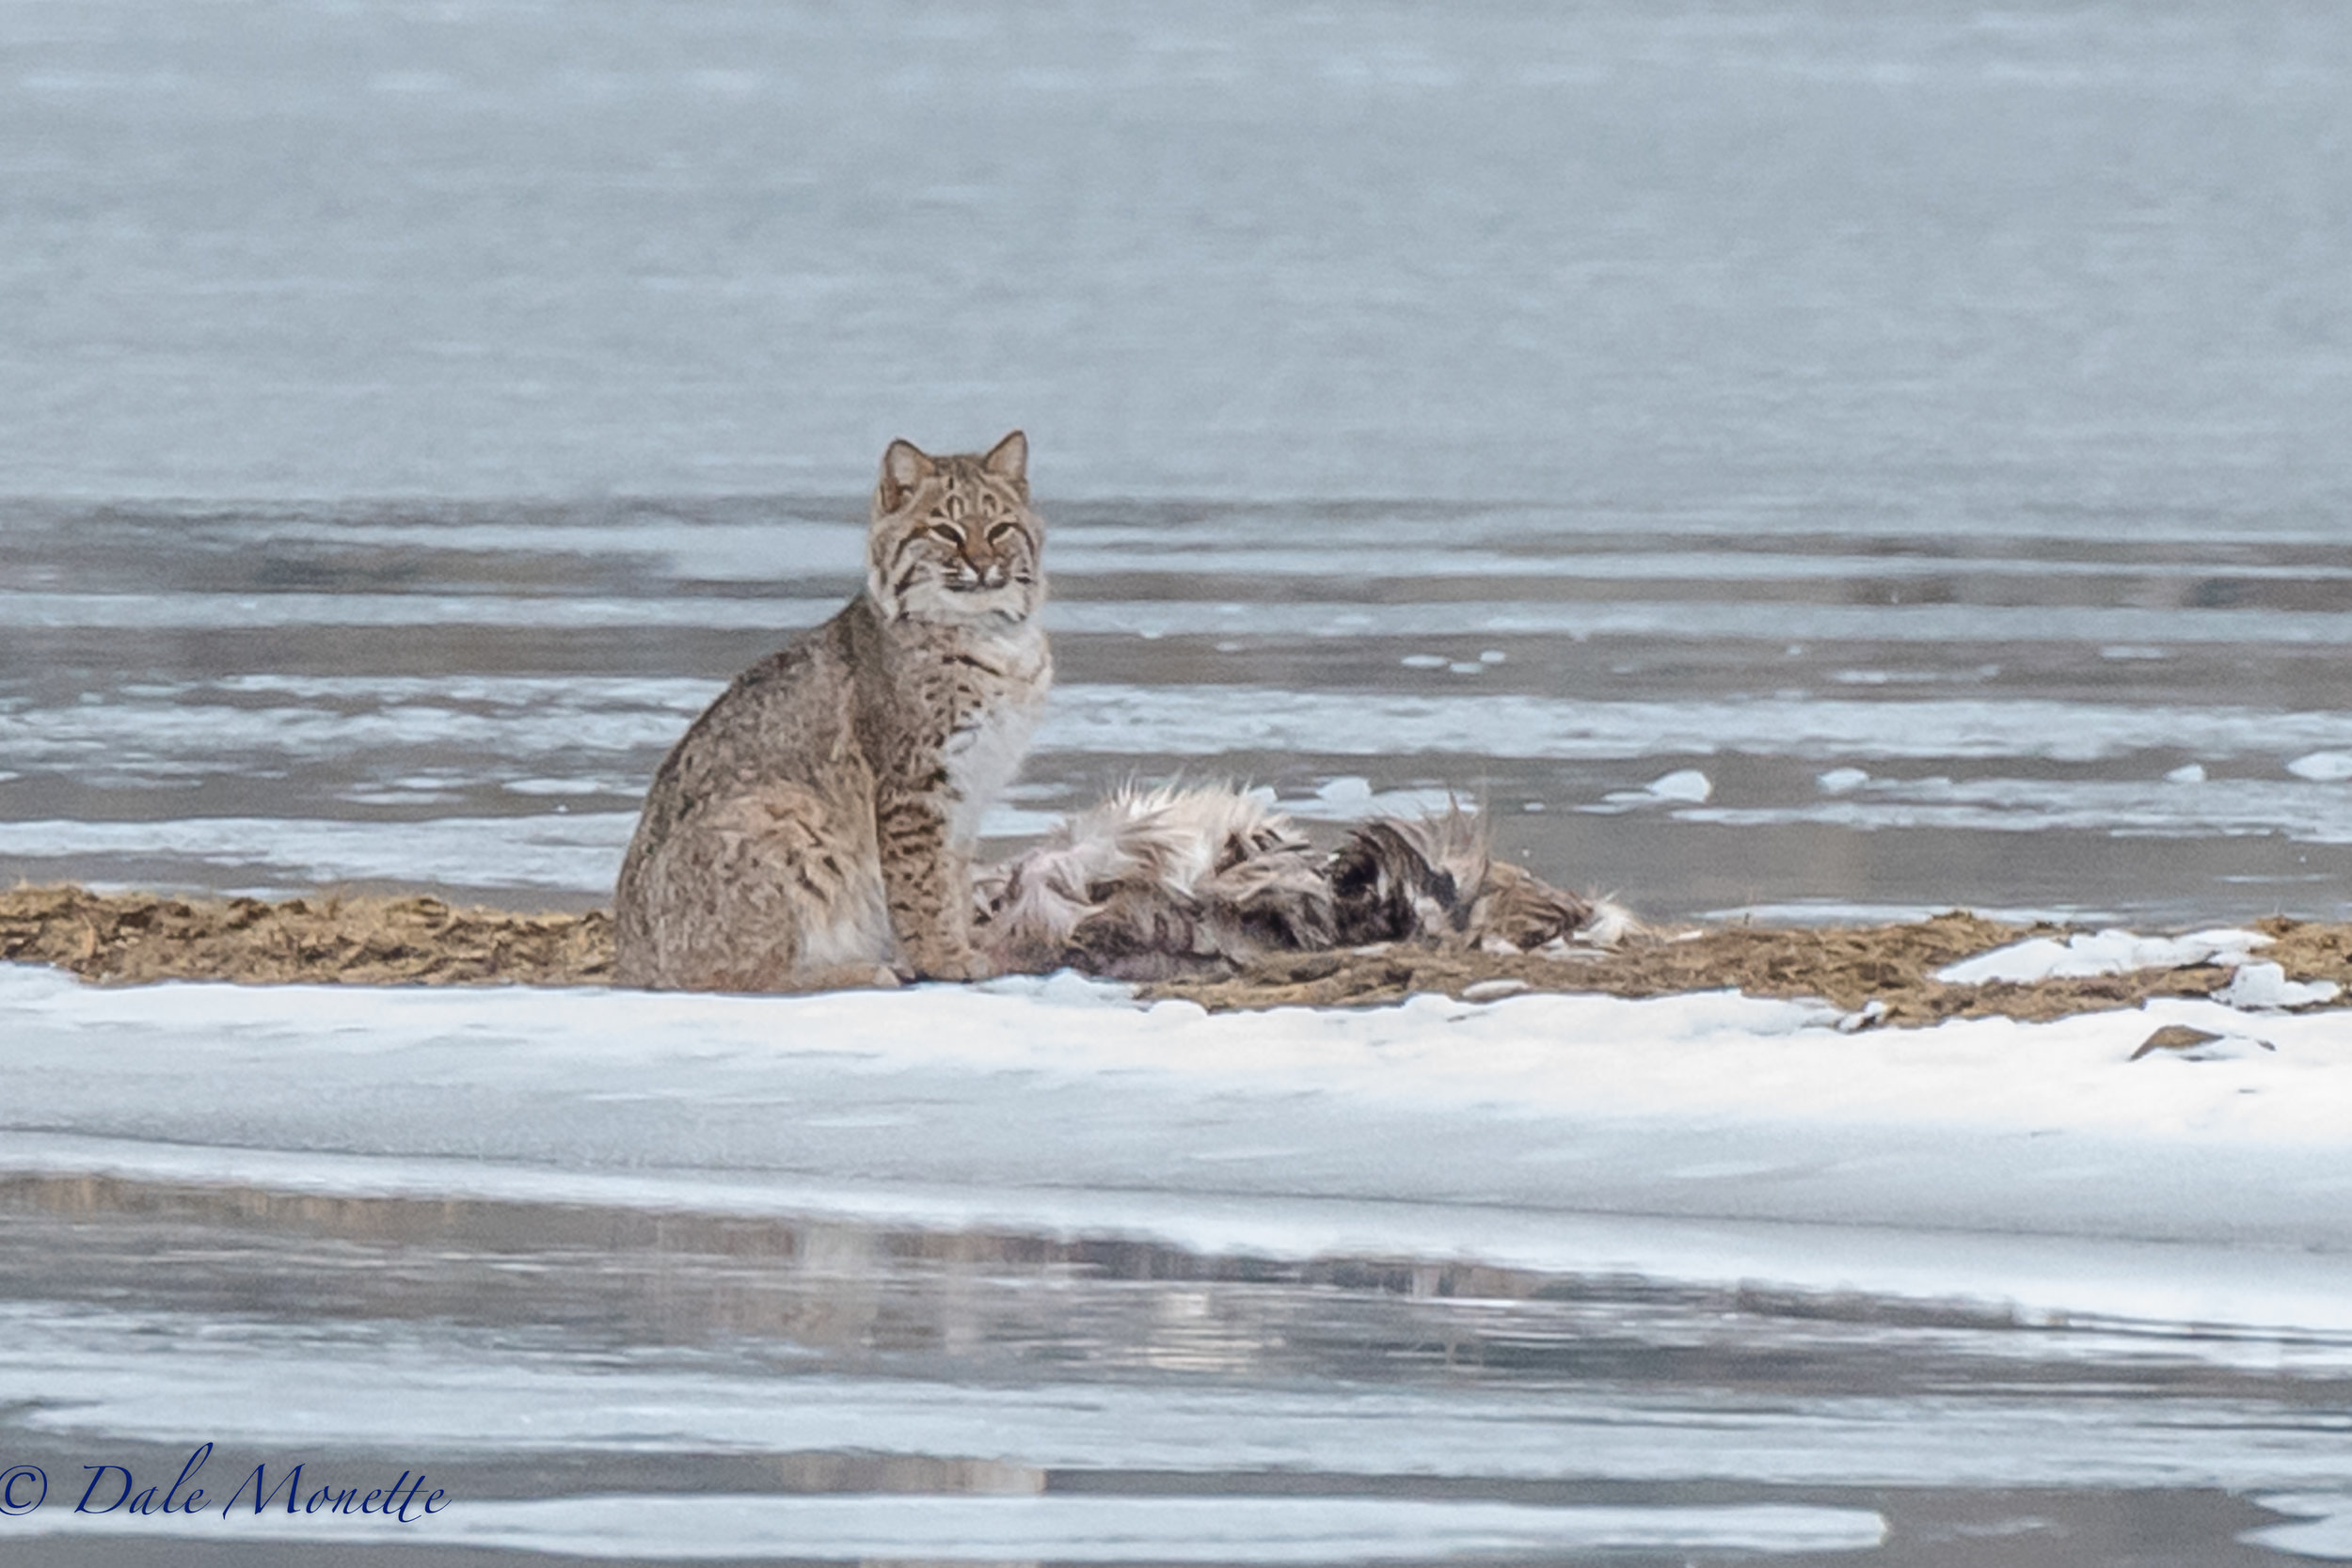   I watched this bobcat feed on a deer carcass on the ice today for about 2 and a half hours. &nbsp;It was quite an experience ! &nbsp;1/4/17  